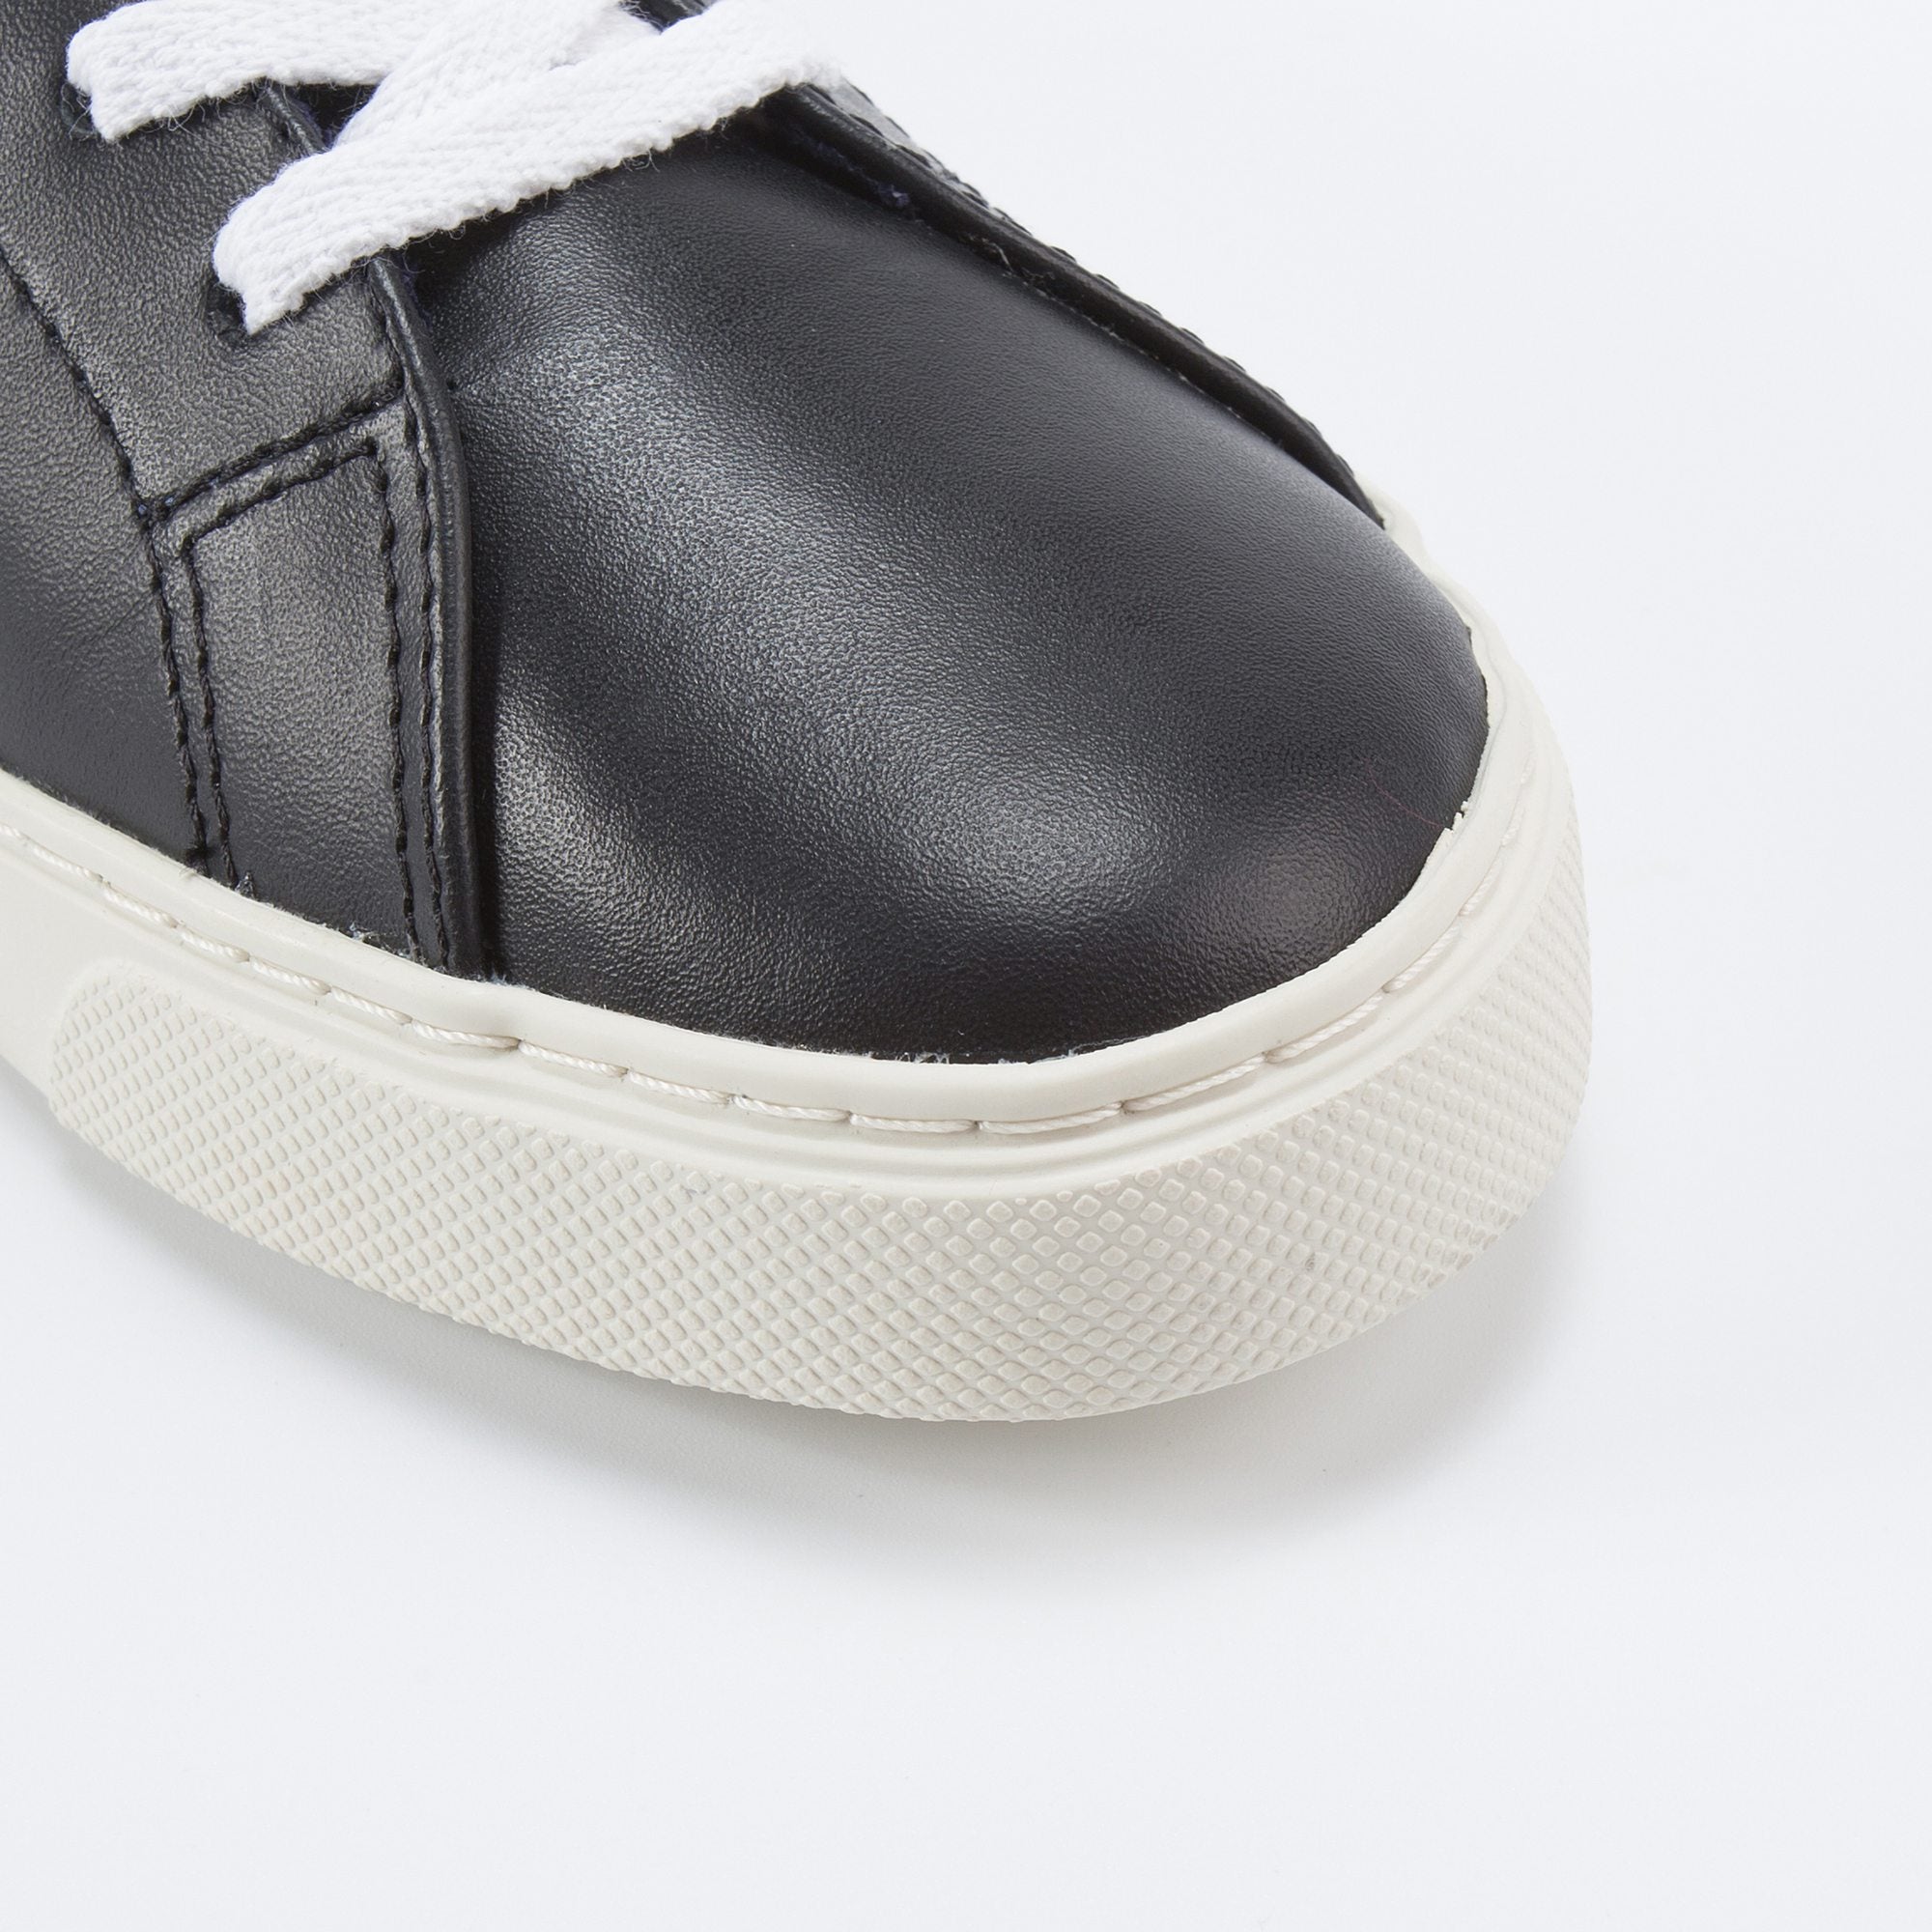 Girls & Boys Black Leather Velcro With White "V" Shoes